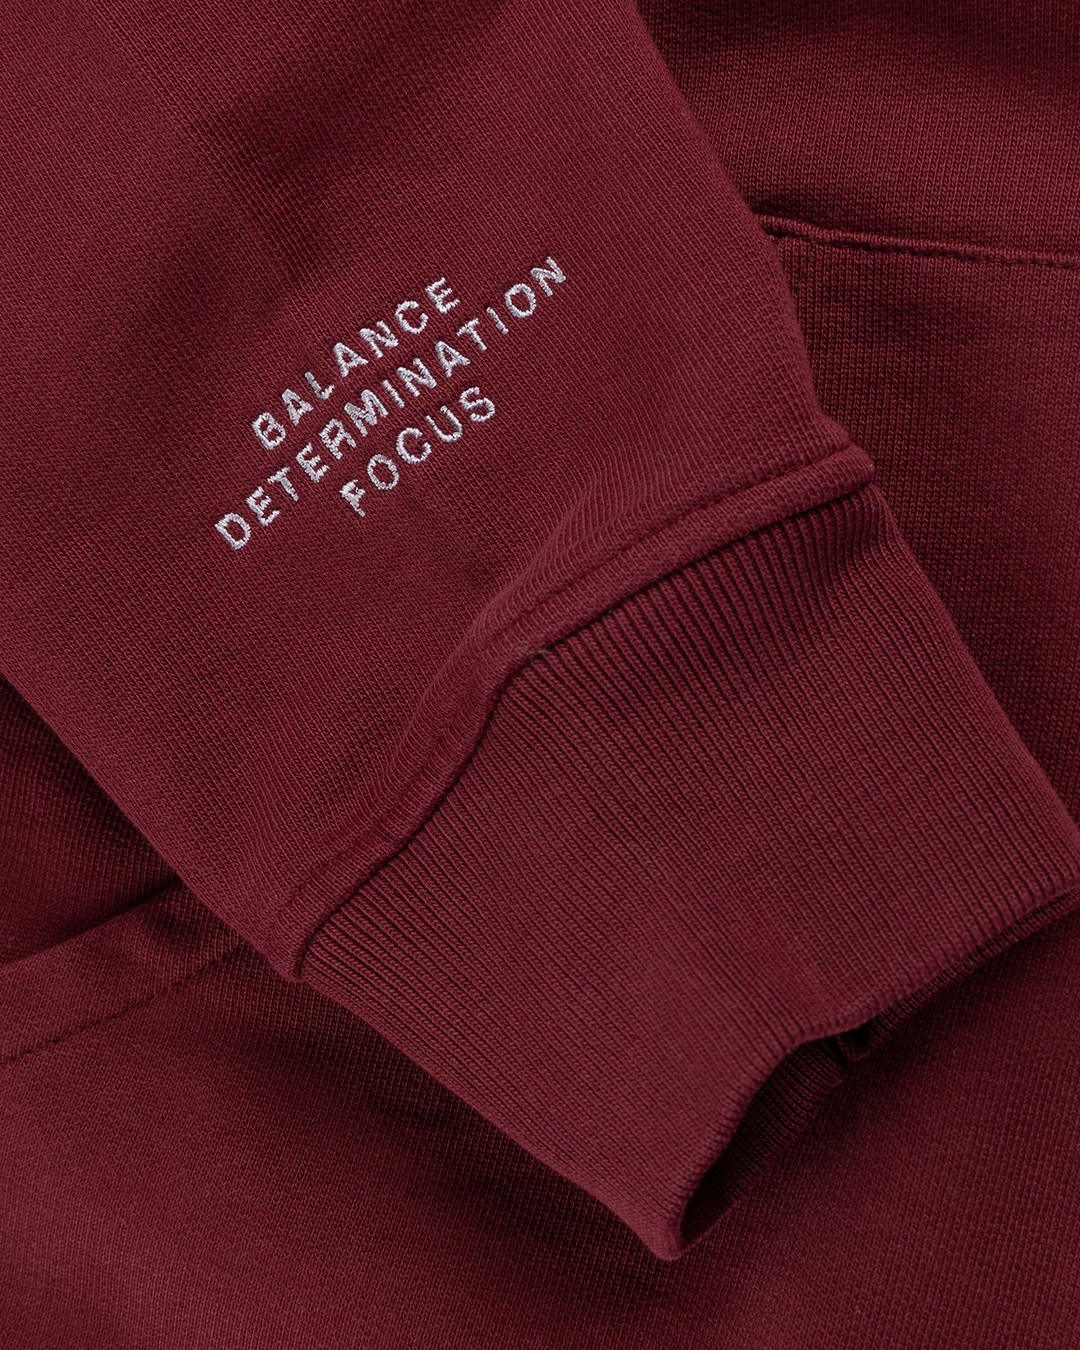 Highsnobiety – HS Sports Focus Hoodie Bordeaux - Sweats - Red - Image 5